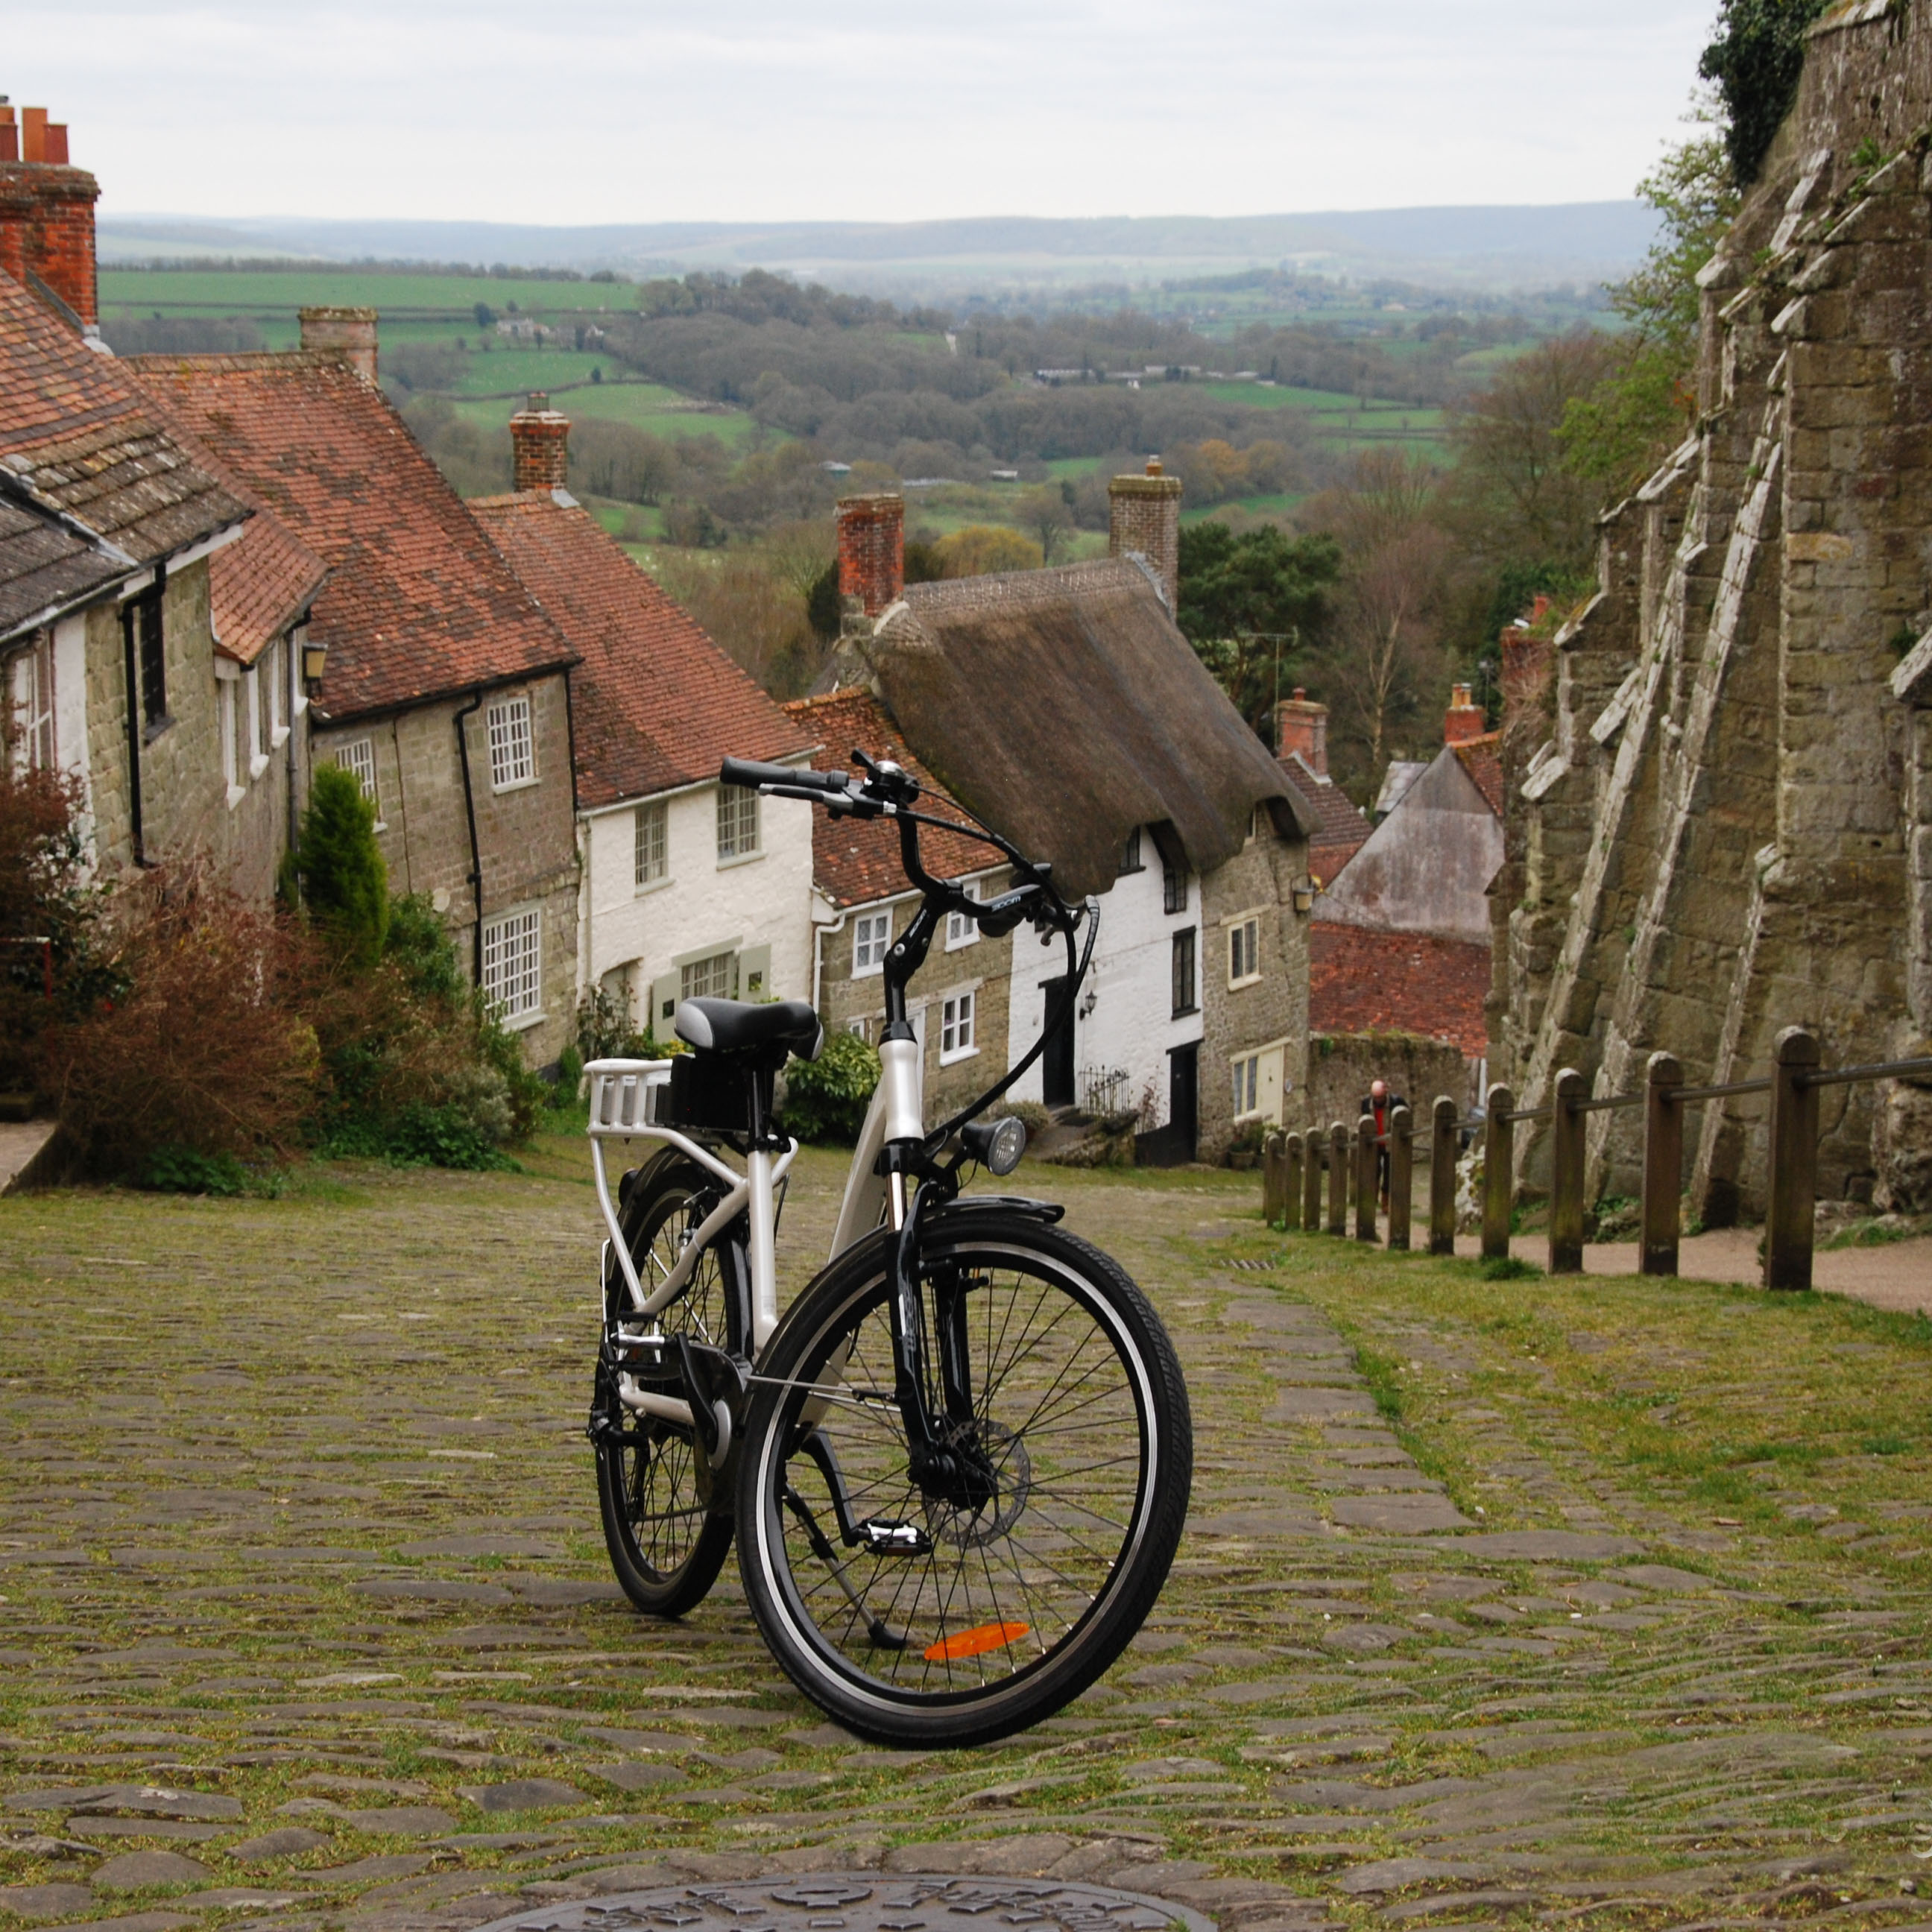 Ex Demo RooDog Chic Electric Bike on Gold Hill in Shaftesbury Dorset